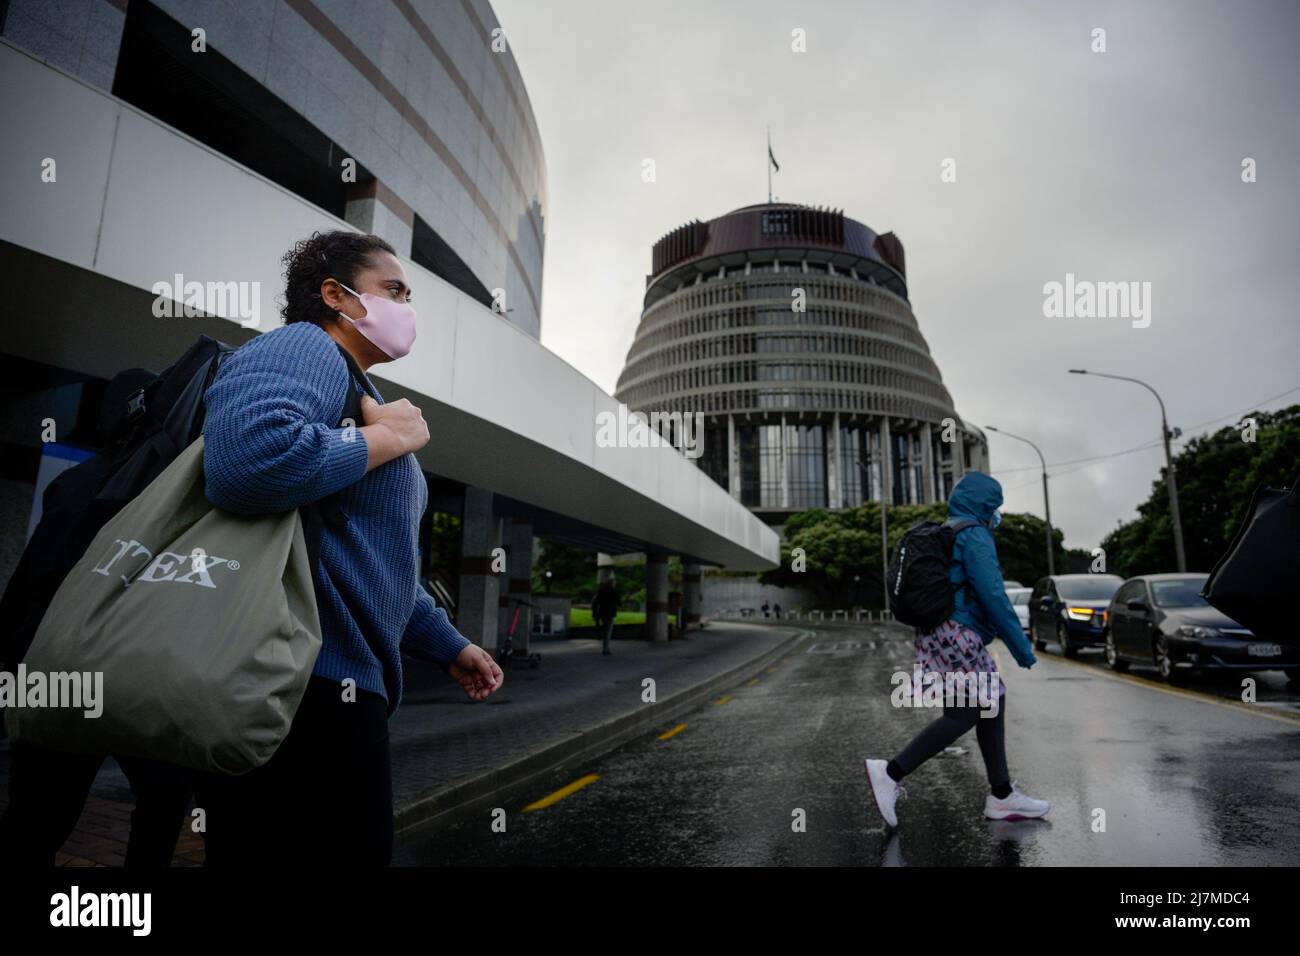 (220510) -- WELLINGTON, May 10, 2022 (Xinhua) -- People wearing masks walk pass Beehive, the Parliament building of New Zealand, in Wellington, New Zealand, May 10, 2022. New Zealand has reported 1,001,898 confirmed cases of COVID-19 since the beginning of the pandemic in early 2020, surpassing the one-million mark, the Ministry of Health said on Tuesday. (Xinhua/Guo Lei) Stock Photo